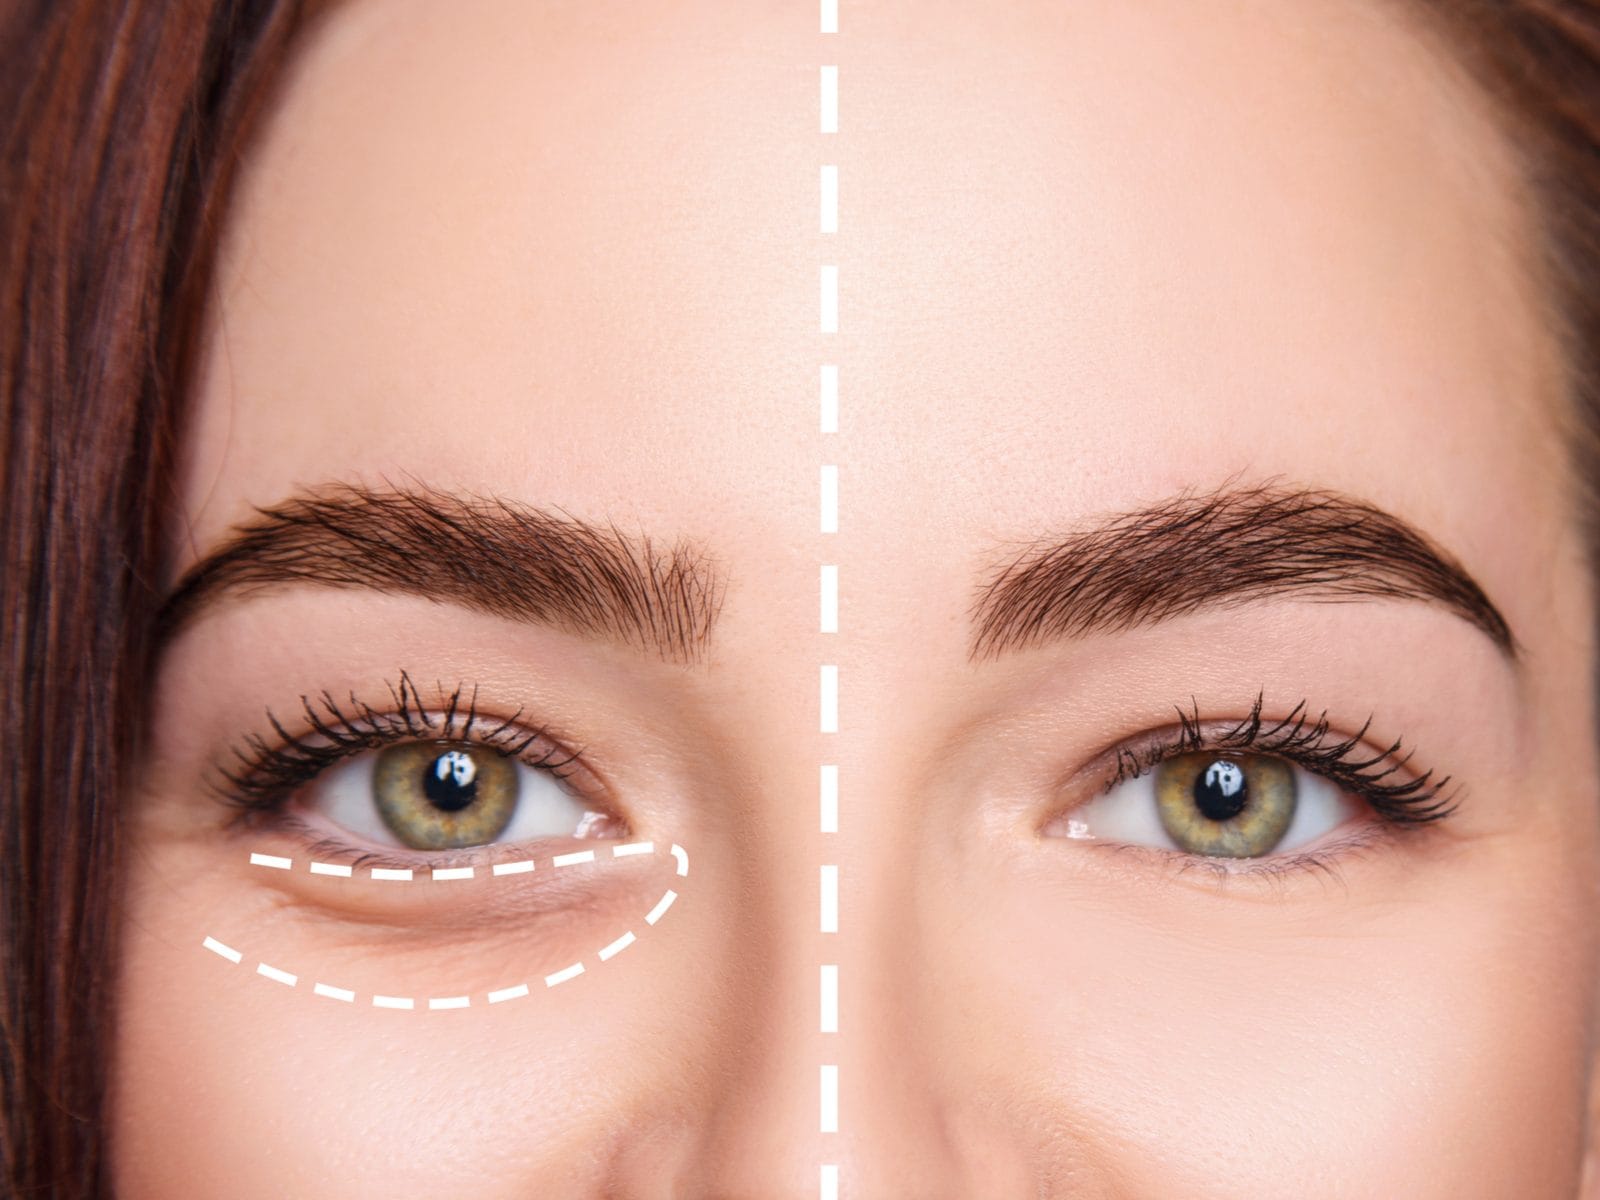 Tired of Bags Under Your Eyes? Try These Easy Tips to Get Rid of